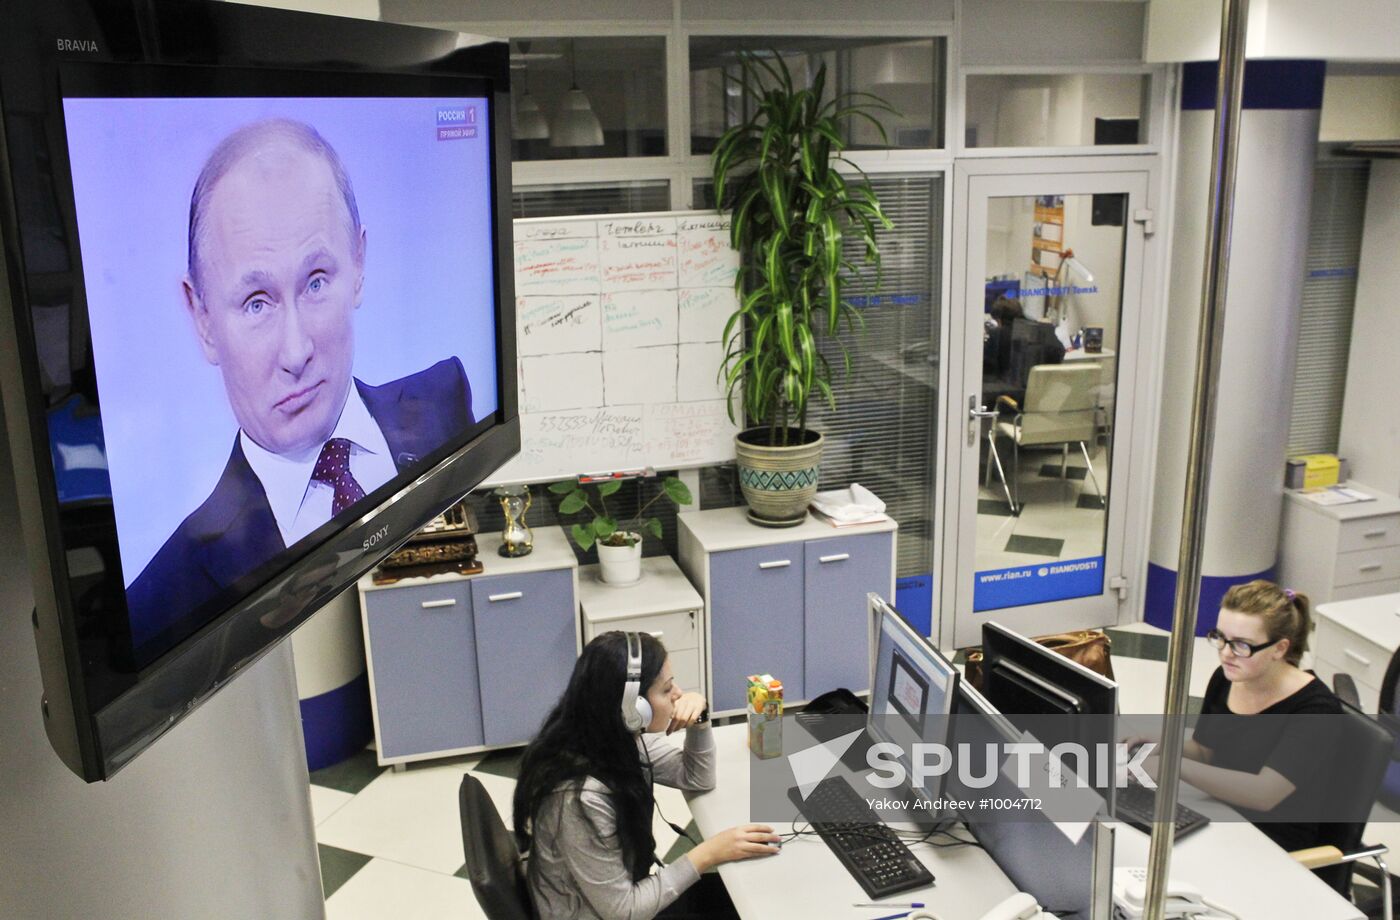 Broadcasting of Q&A session 'A Conversation with Vladimir Putin'